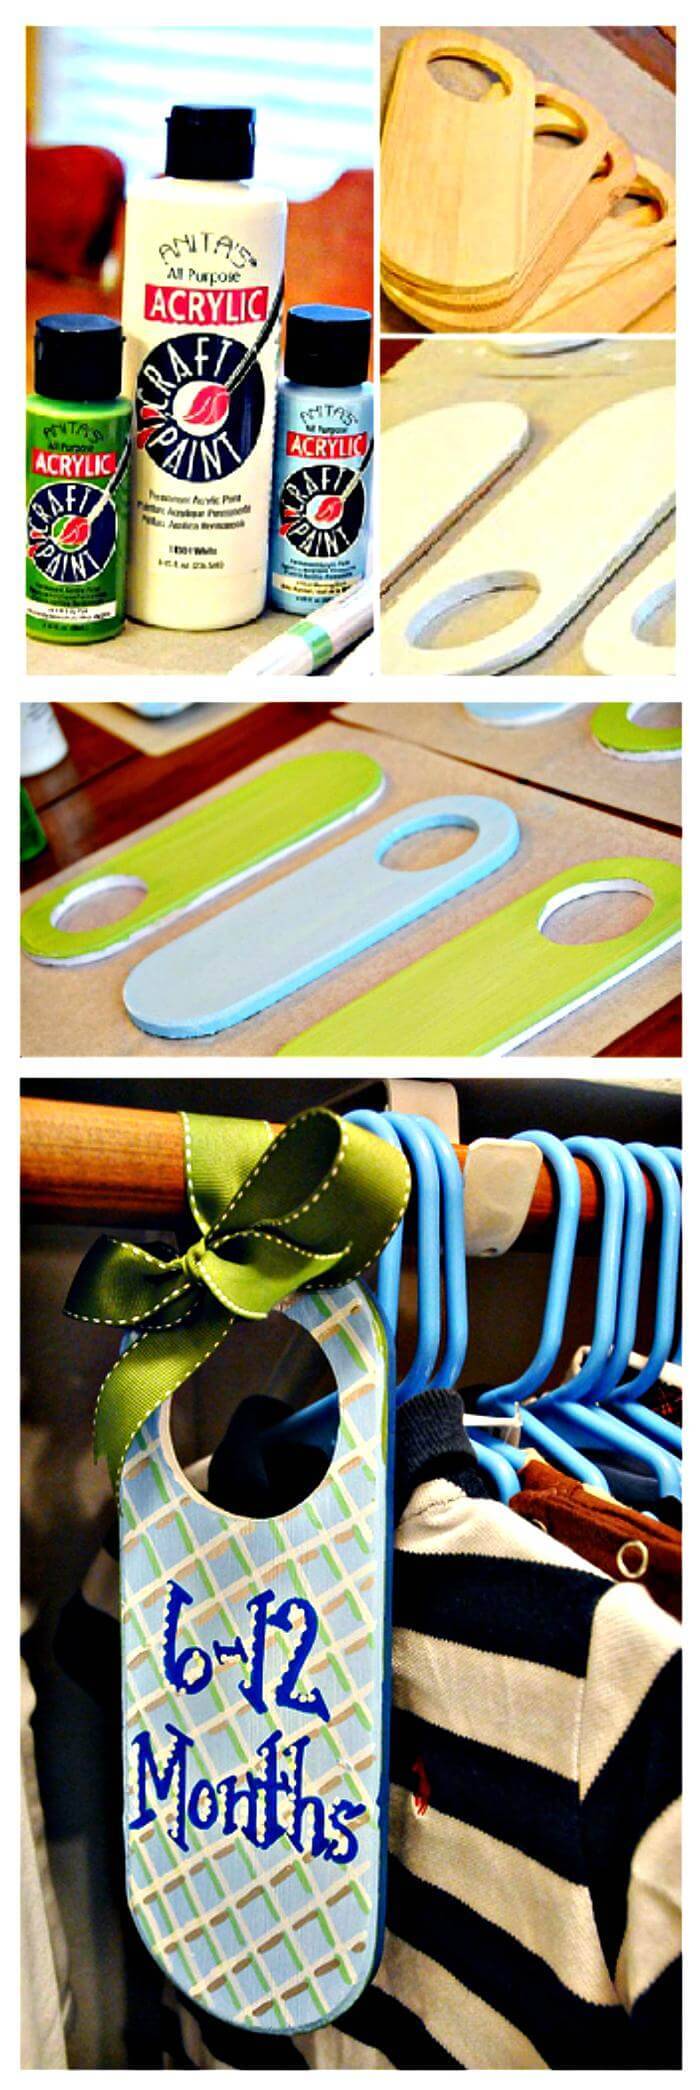 Baby Closet Dividers DIY to Organize Infant Clothing